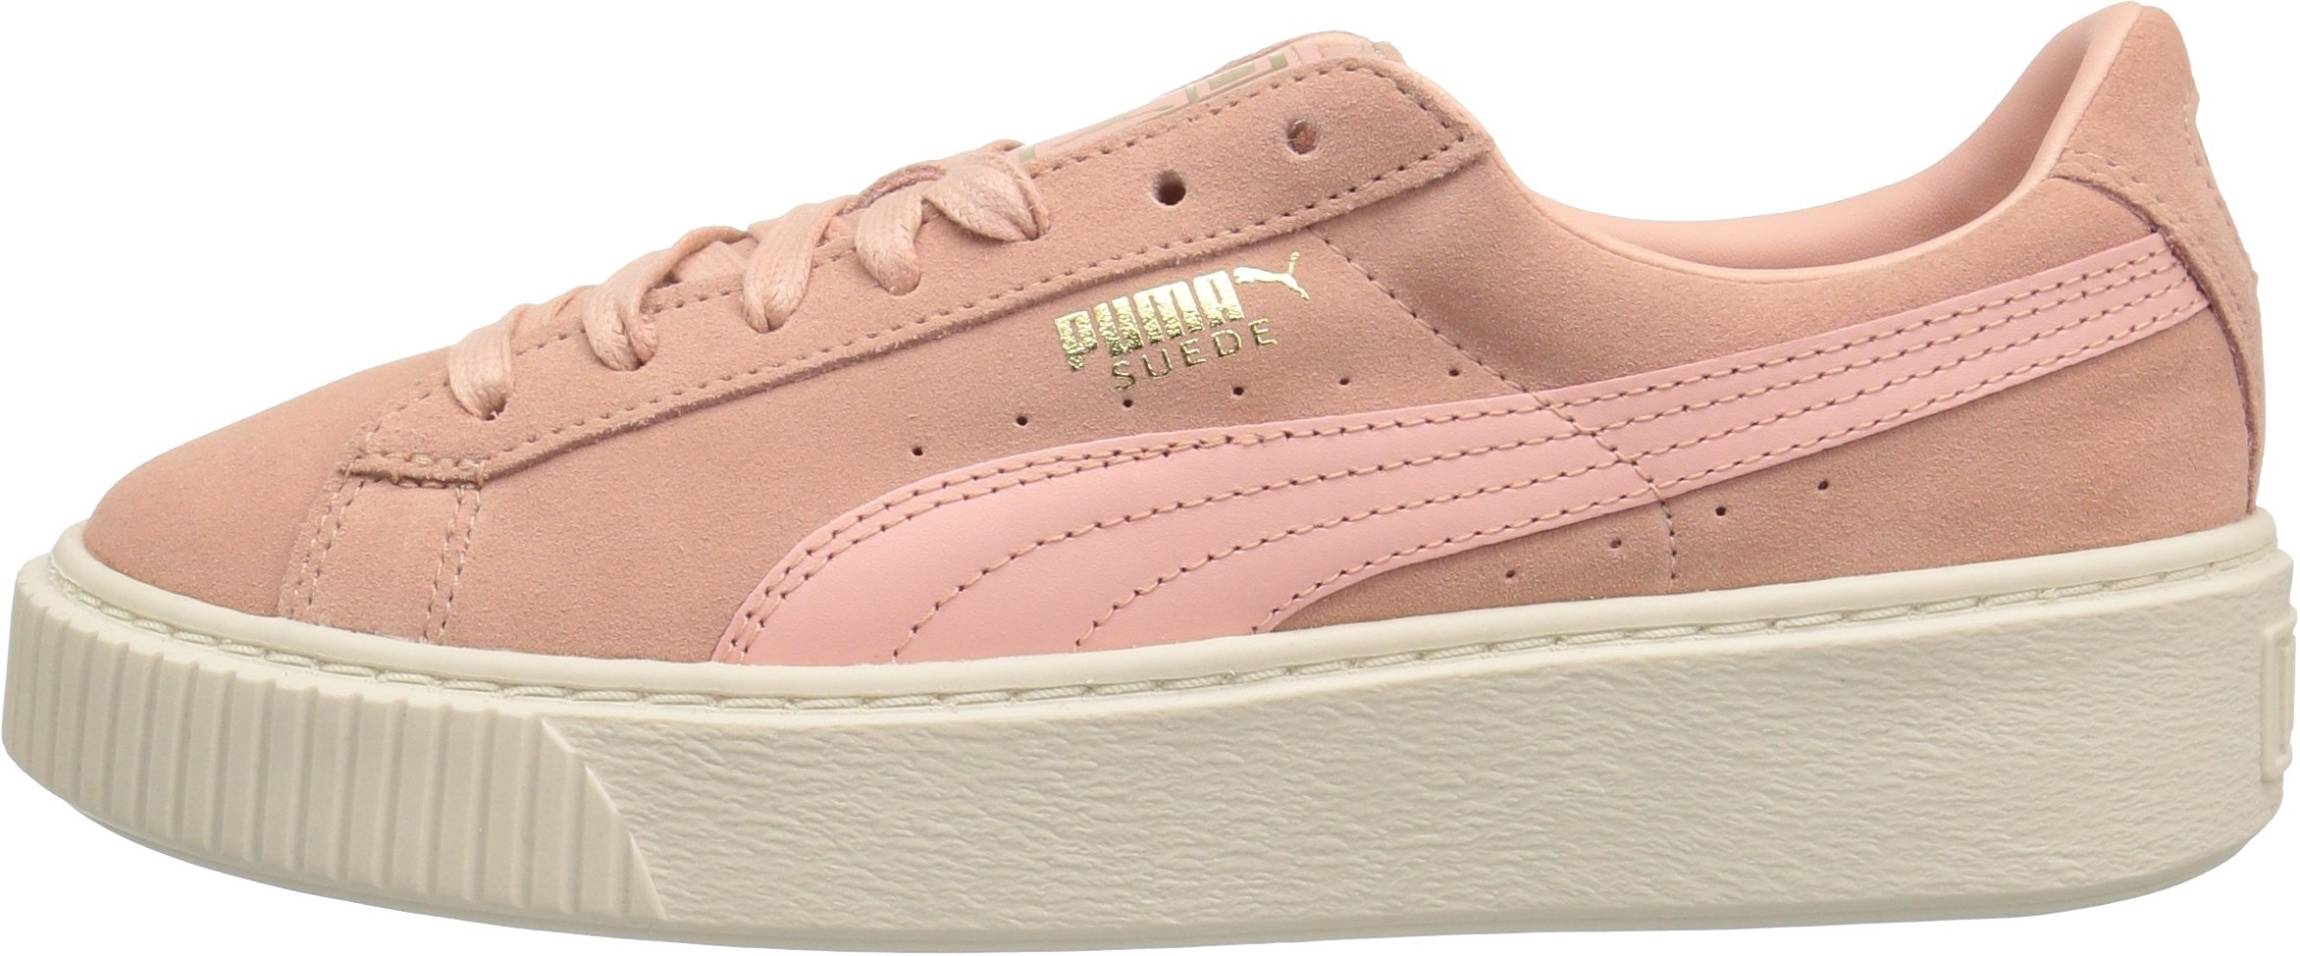 Puma Suede Platform Core sneakers in 7 colors (only $55) | RunRepeat